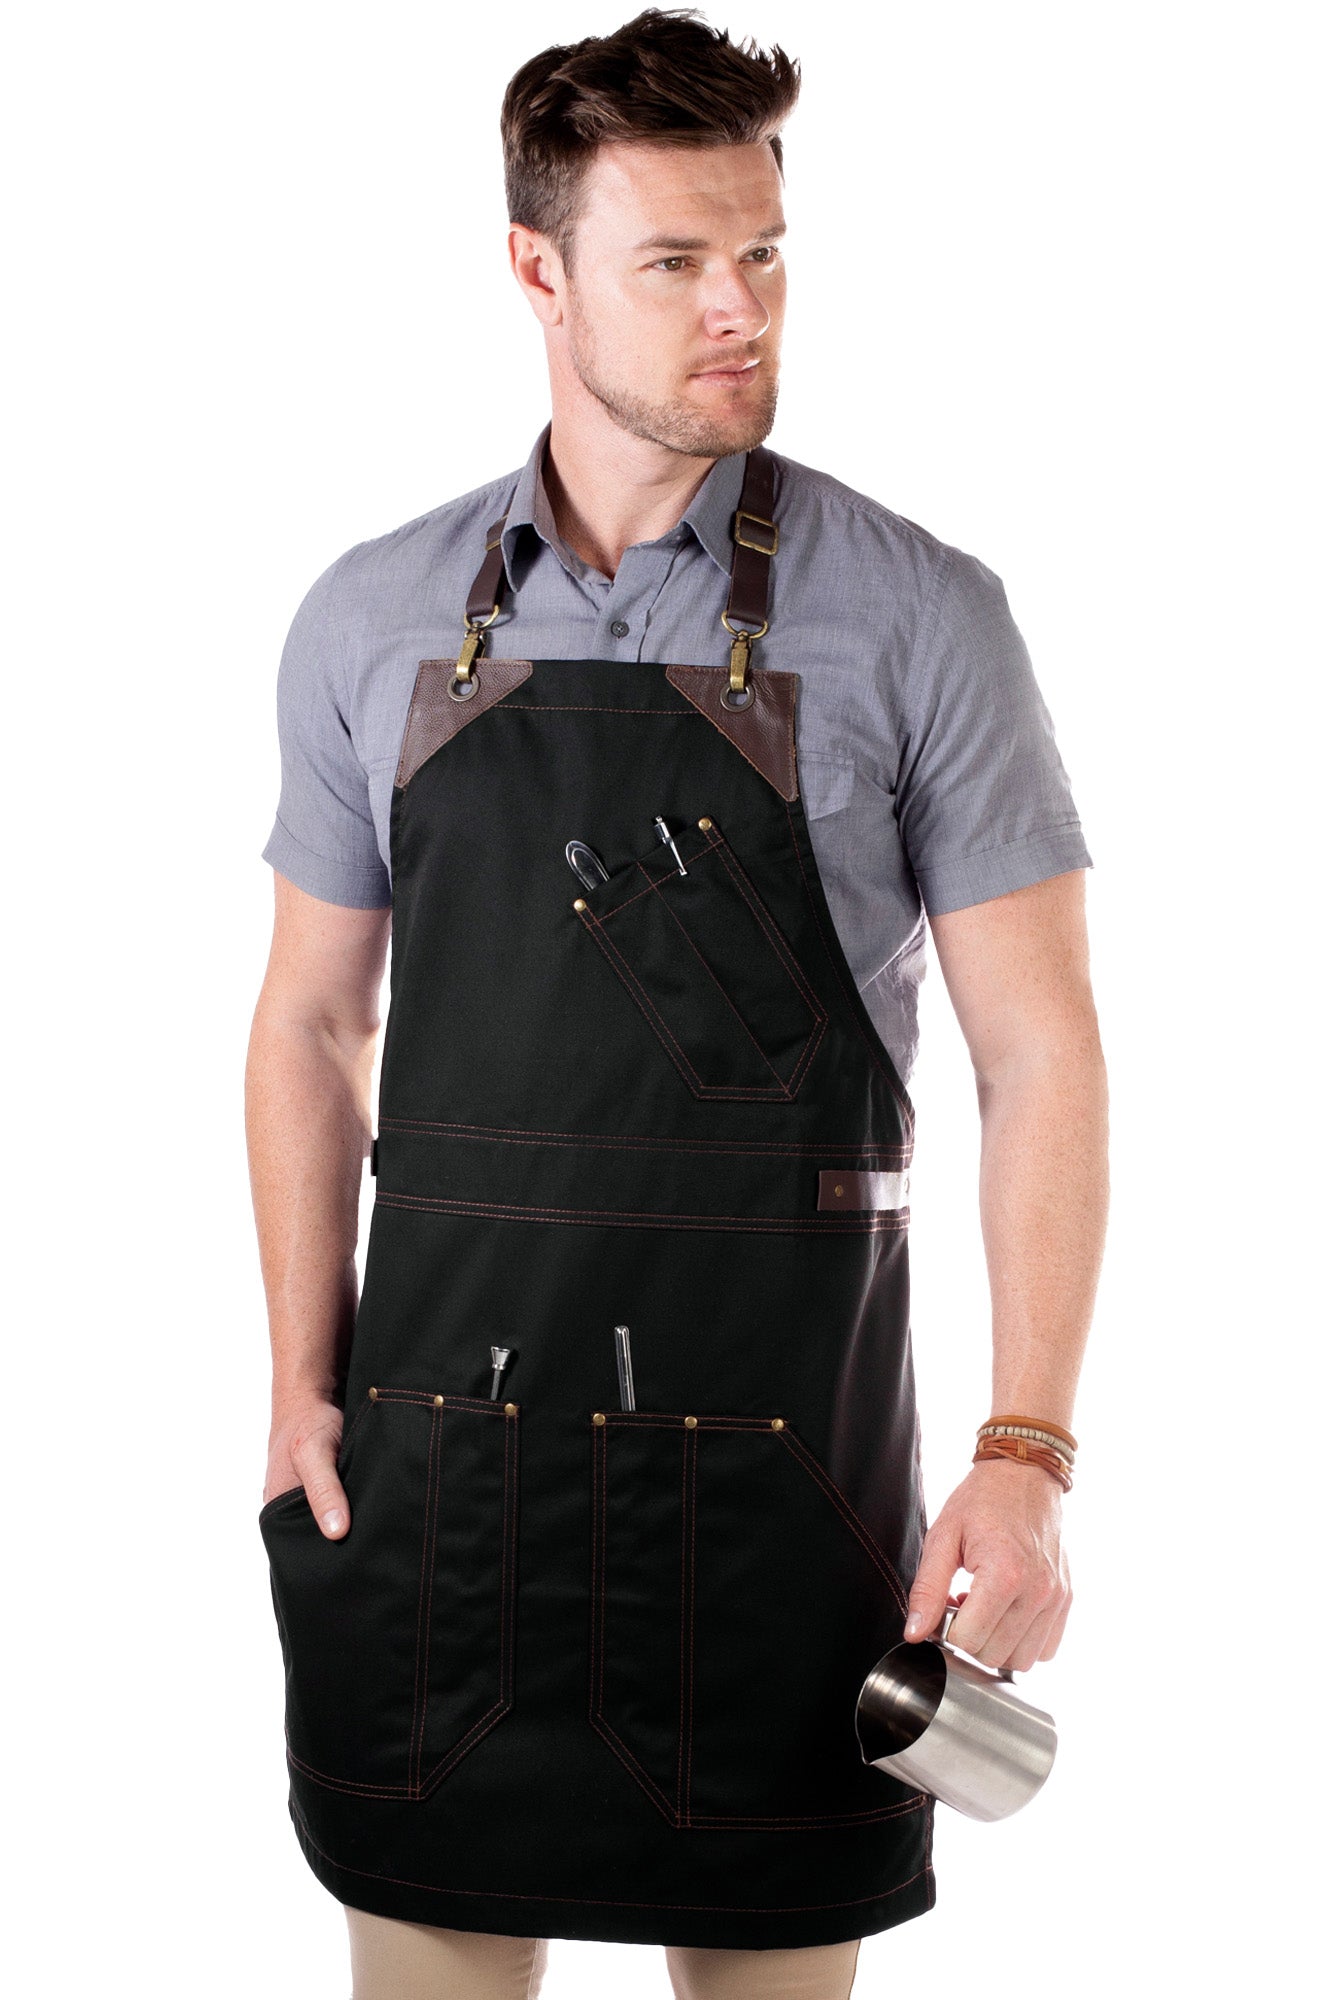 Aprons for Restaurant - Under NY Sky